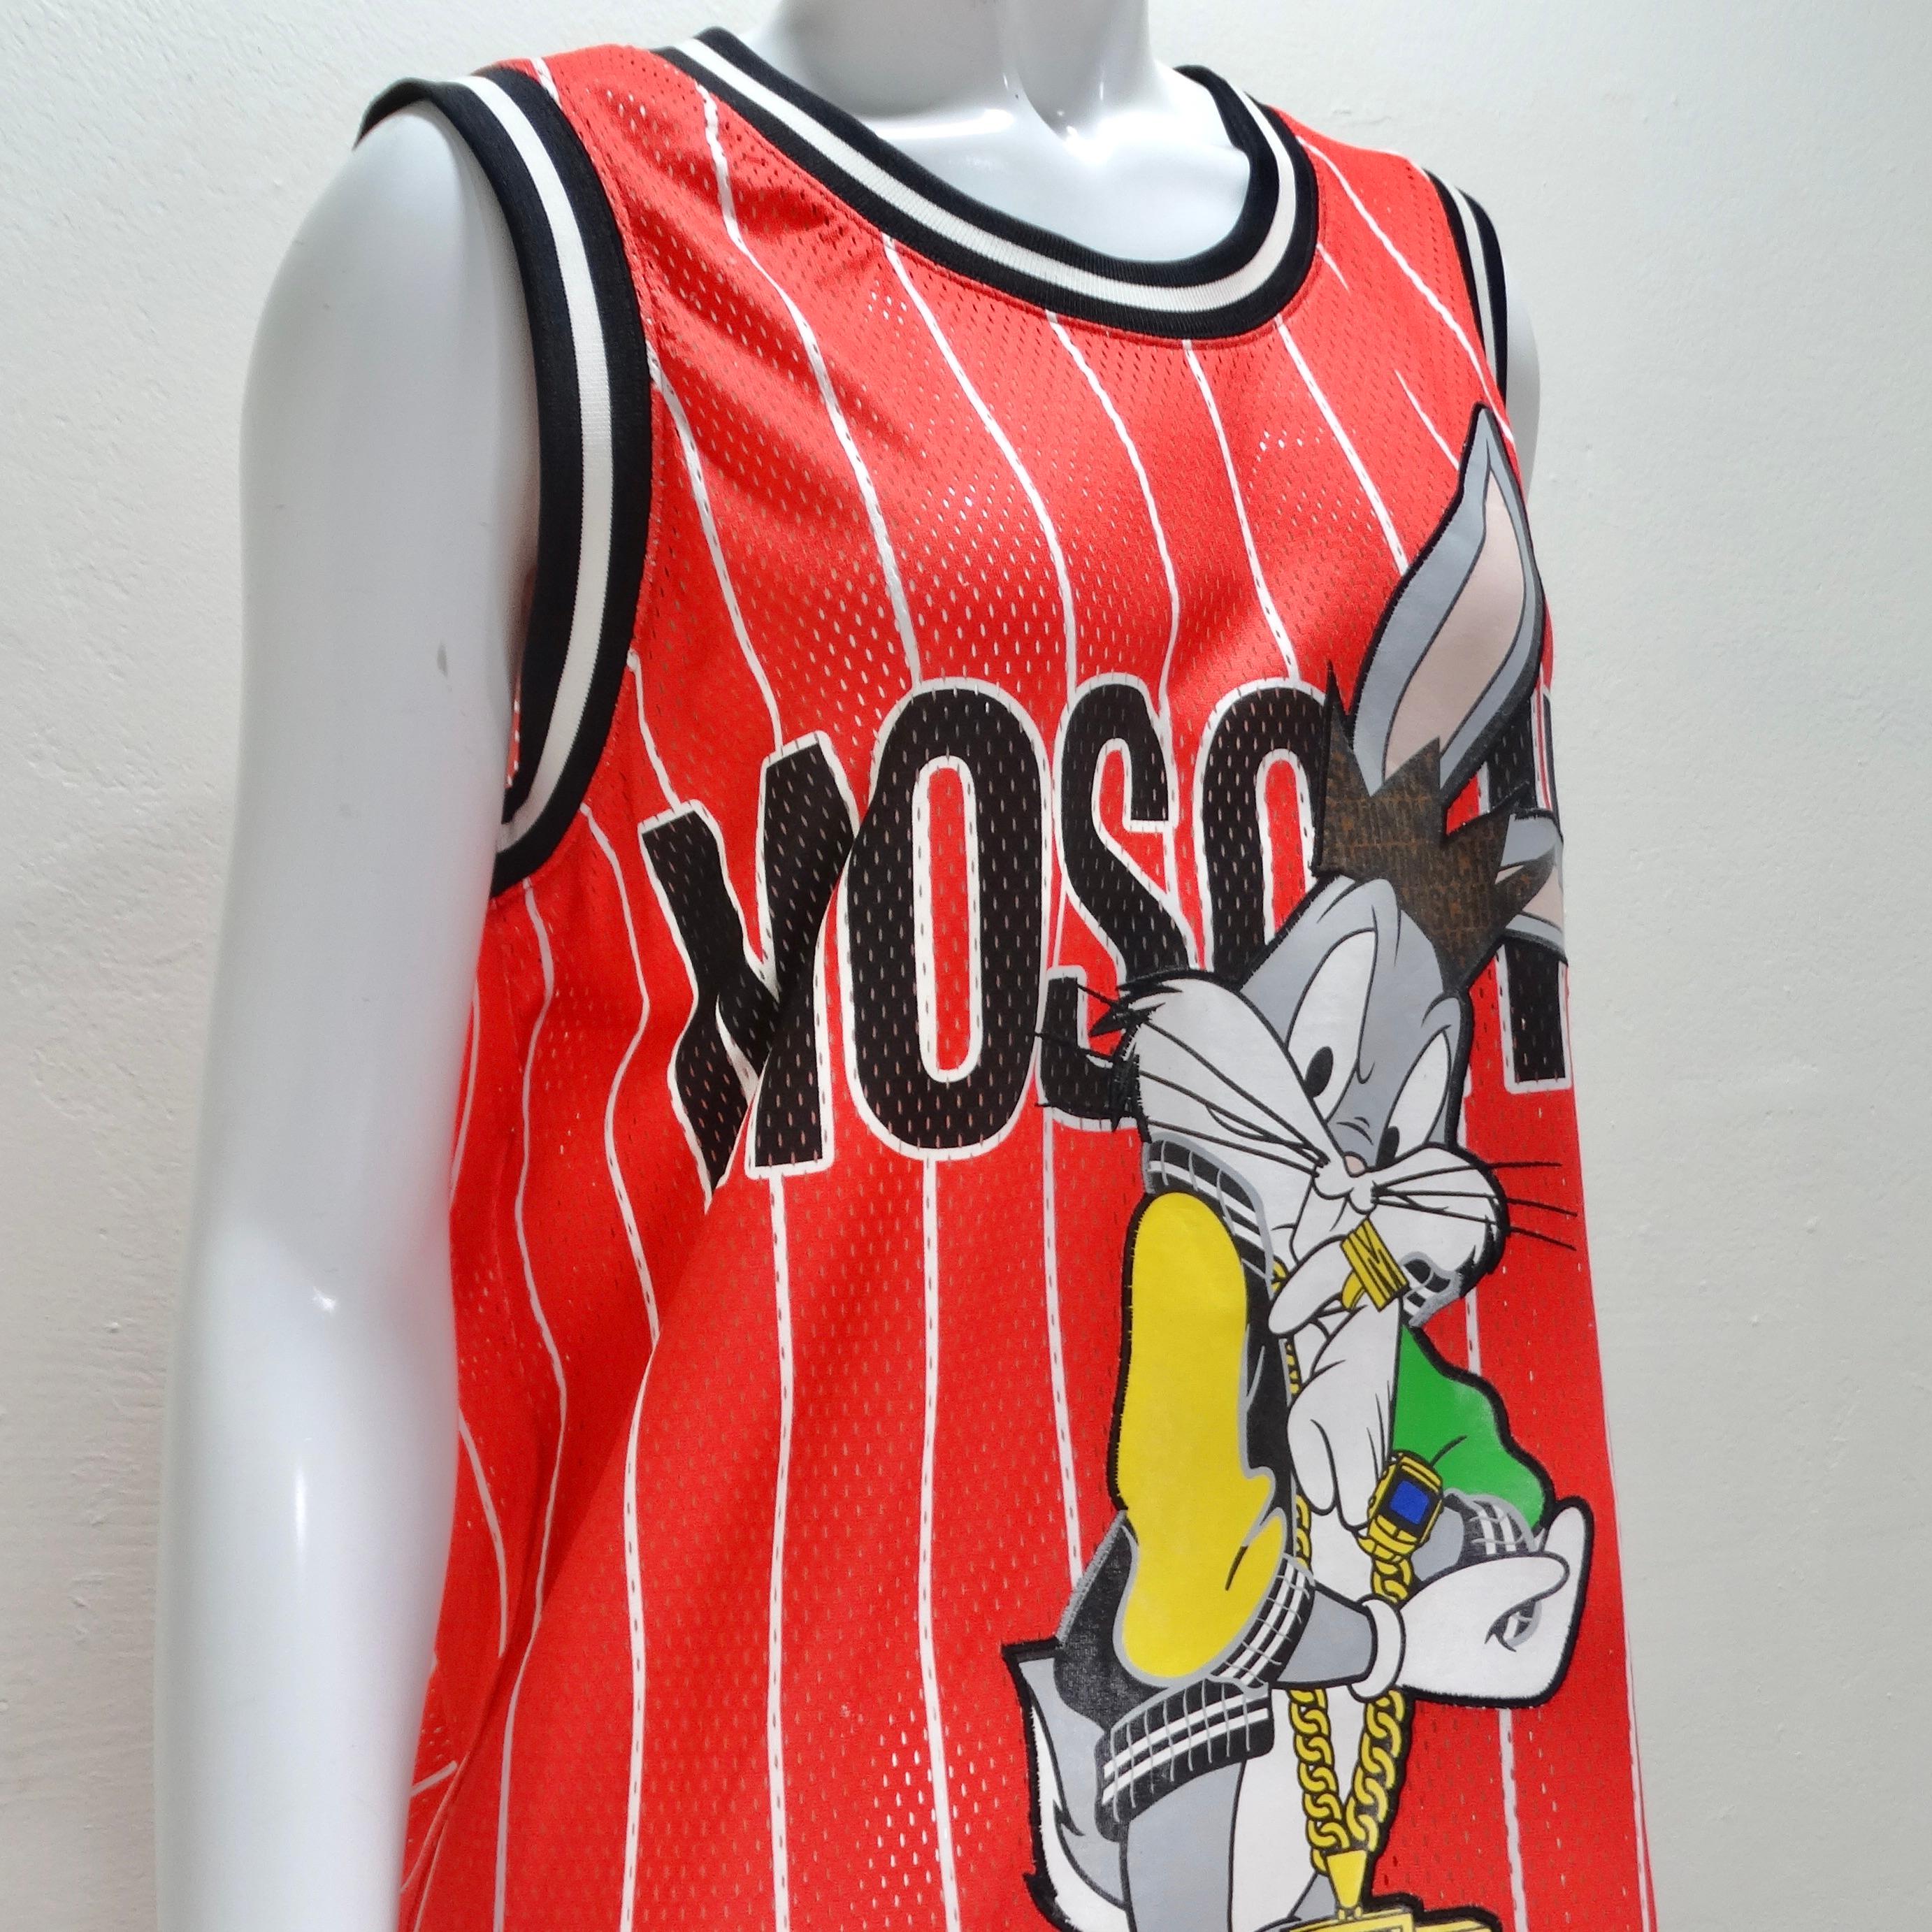 Elevate your streetwear game with the Moschino Couture Bugs Bunny Basketball Jersey - a rare collector's gem that's as stylish as it is playful. This unisex jersey combines fashion and pop culture effortlessly. Its red and white striped sleeveless